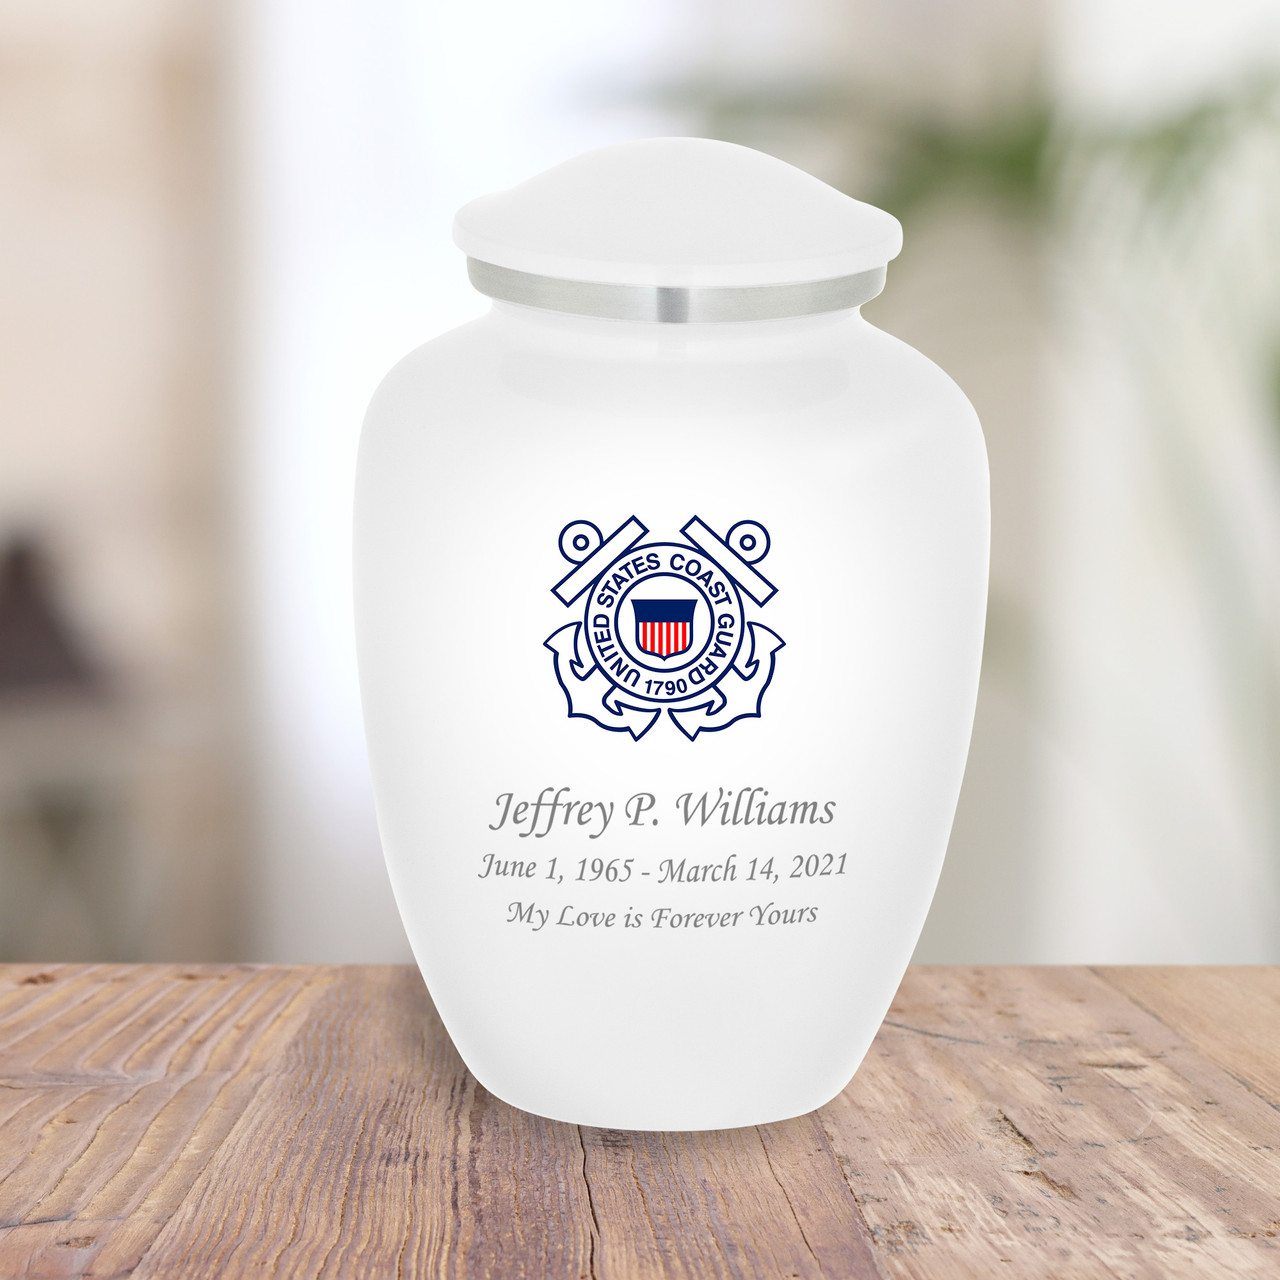 Cremation Urns - Affordable Urns For Human Adult Ashes